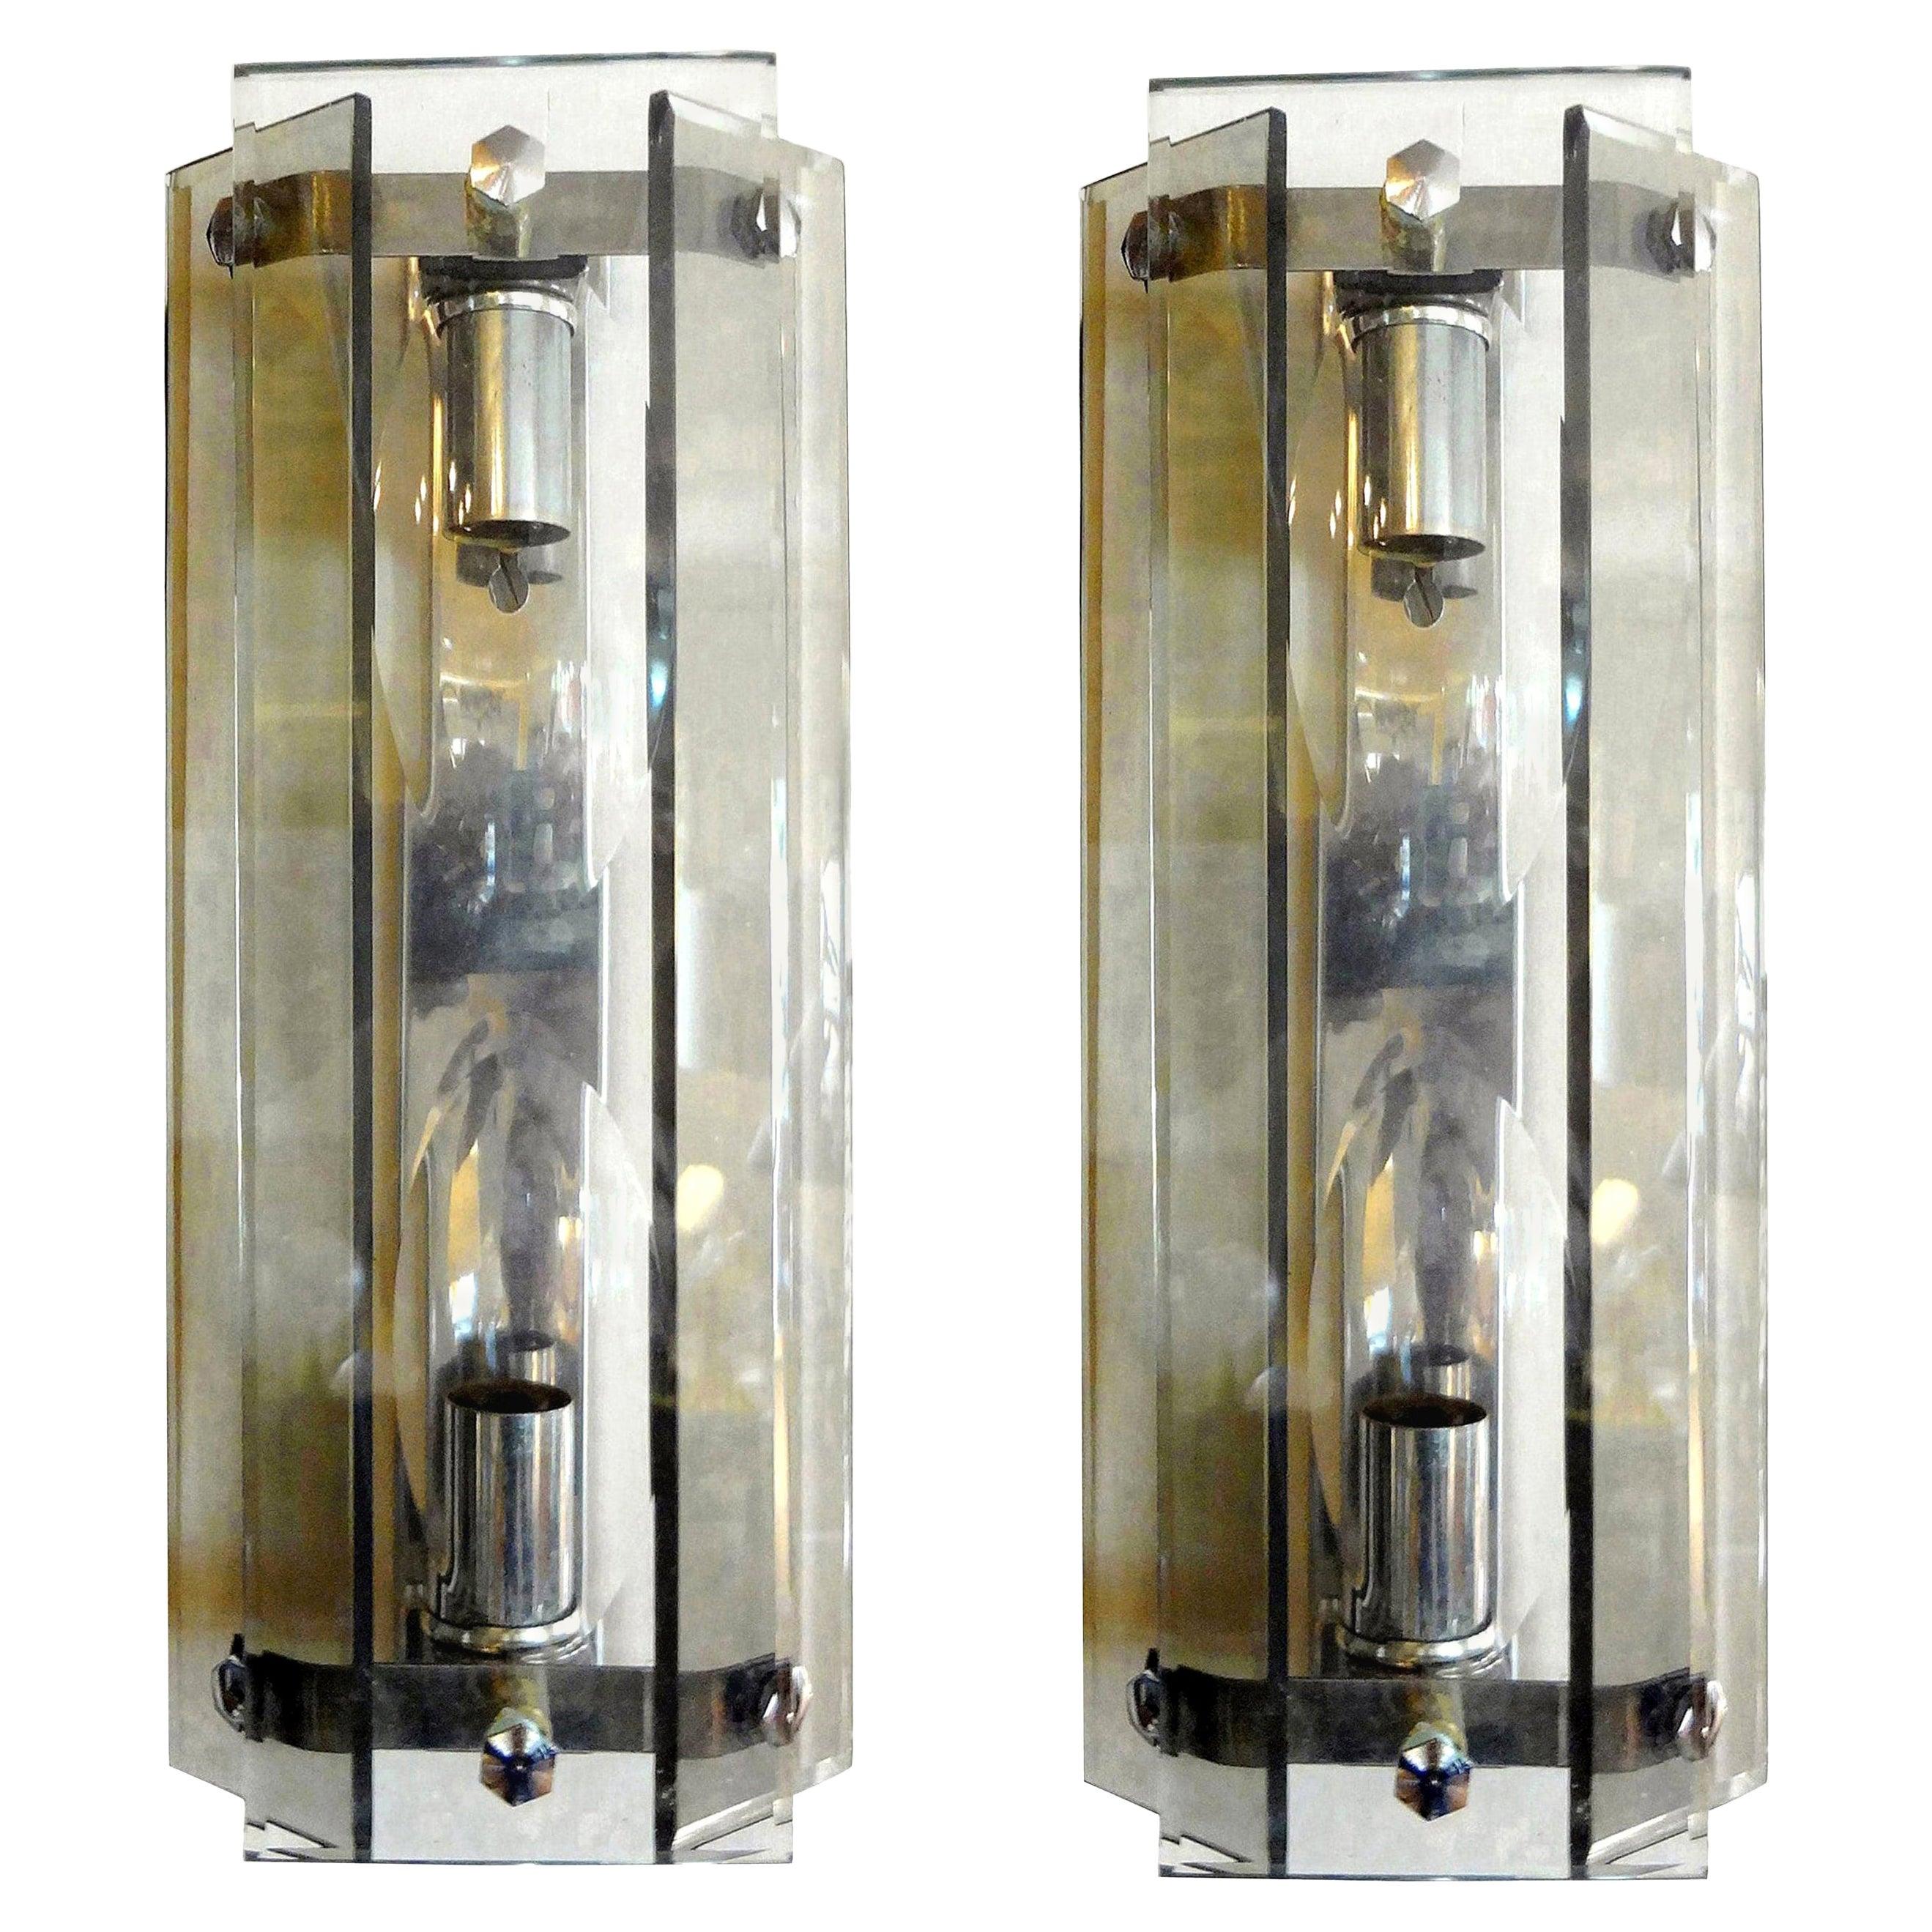 Great pair of Max Ingrand for Fontana Arte style modernist Italian glass sconces with two beveled smoked glass panels on either side with a beveled clear glass central panel by Veca, Milano. These murano glass sconces are newly wired for the U.S.